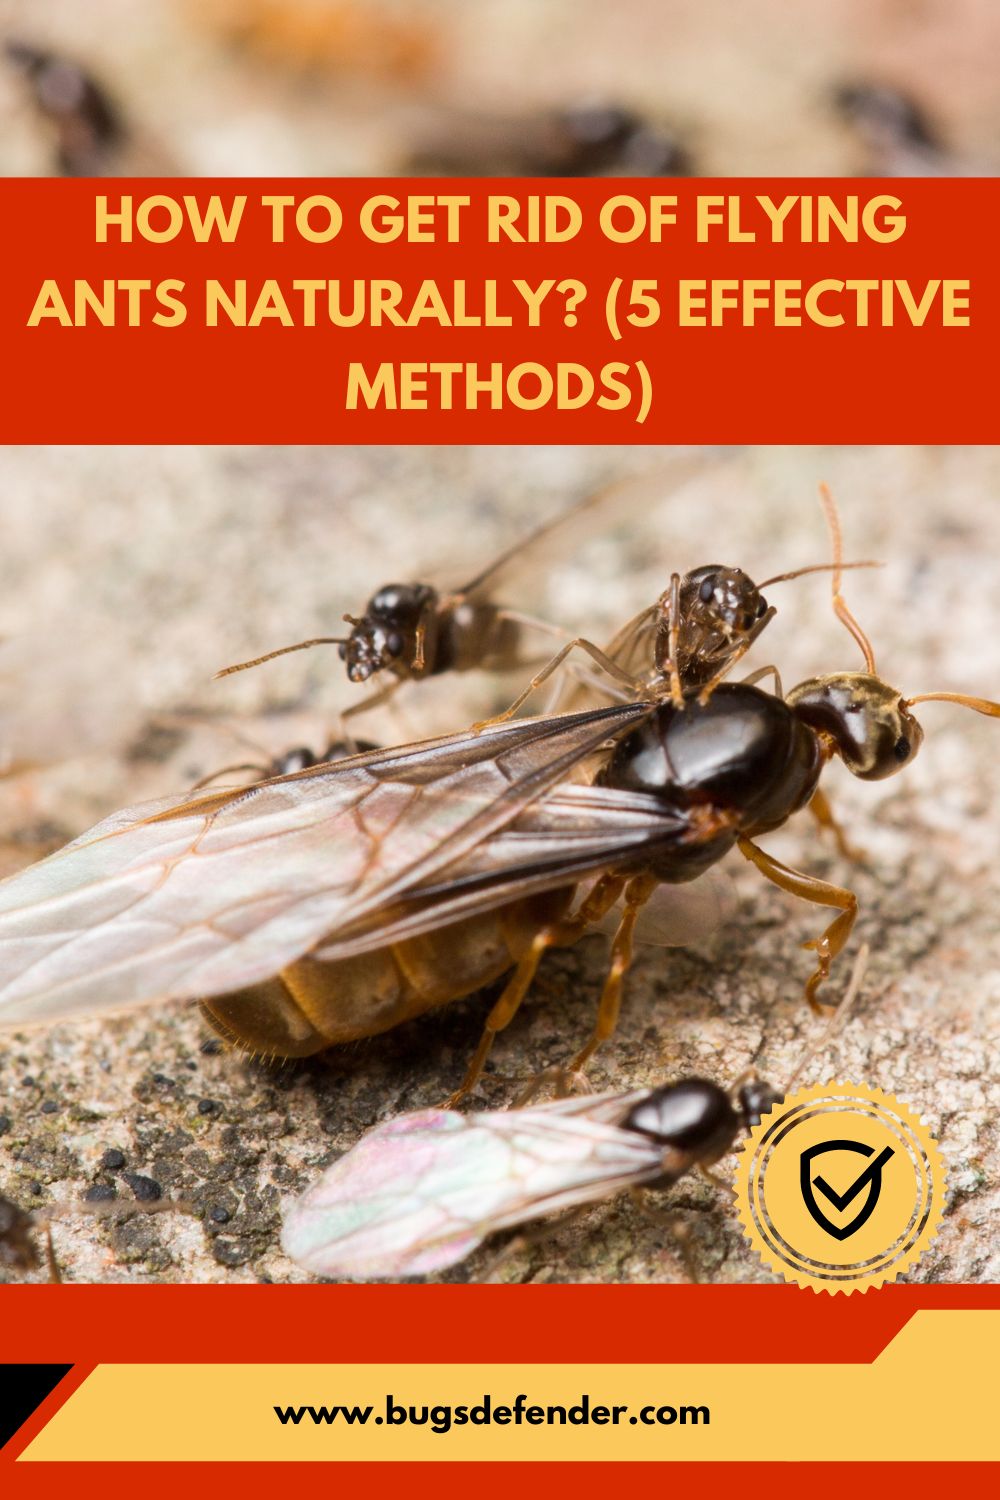 How To Get Rid Of Flying Ants Naturally pin2